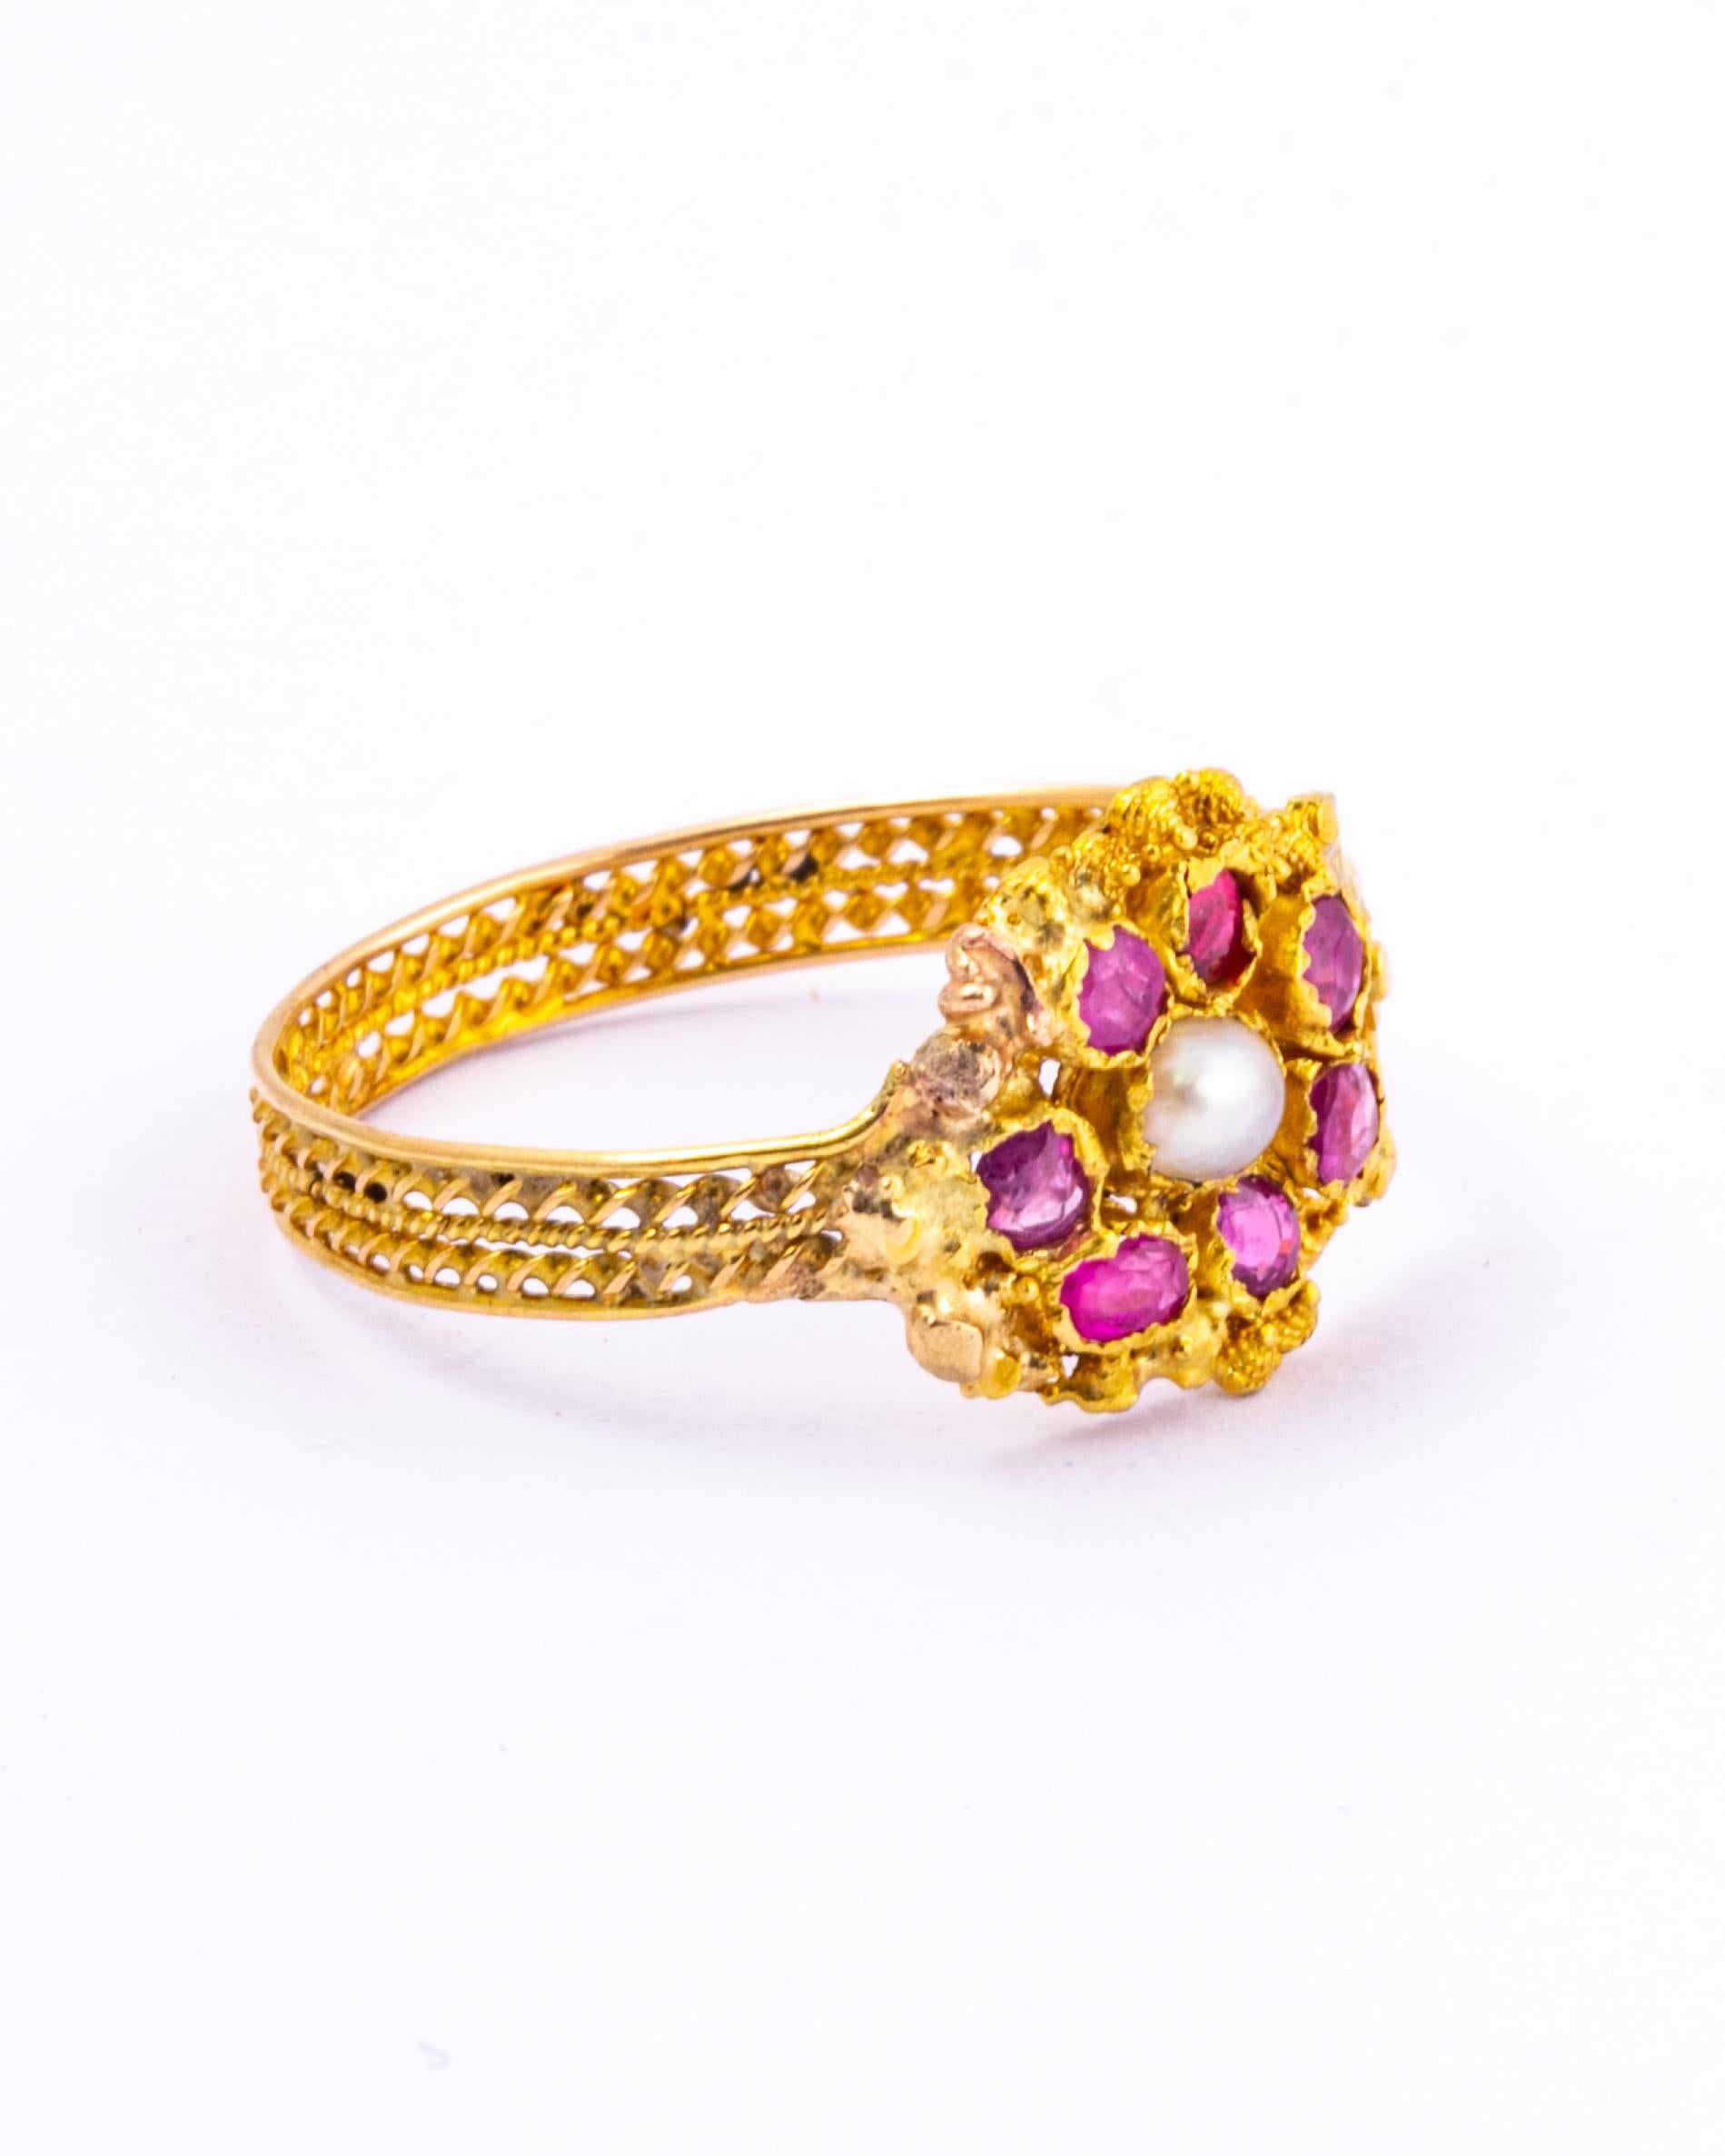 This stunning ring has so much detail. There are seven rose cut rubies and a pearl sat at the centre. Surrounding the stones is intricate cannetille work and the band is made up of fine twisted gold. 

Ring Size: R or 8 1/2 
Width: 11mm

Weight: 1.7g